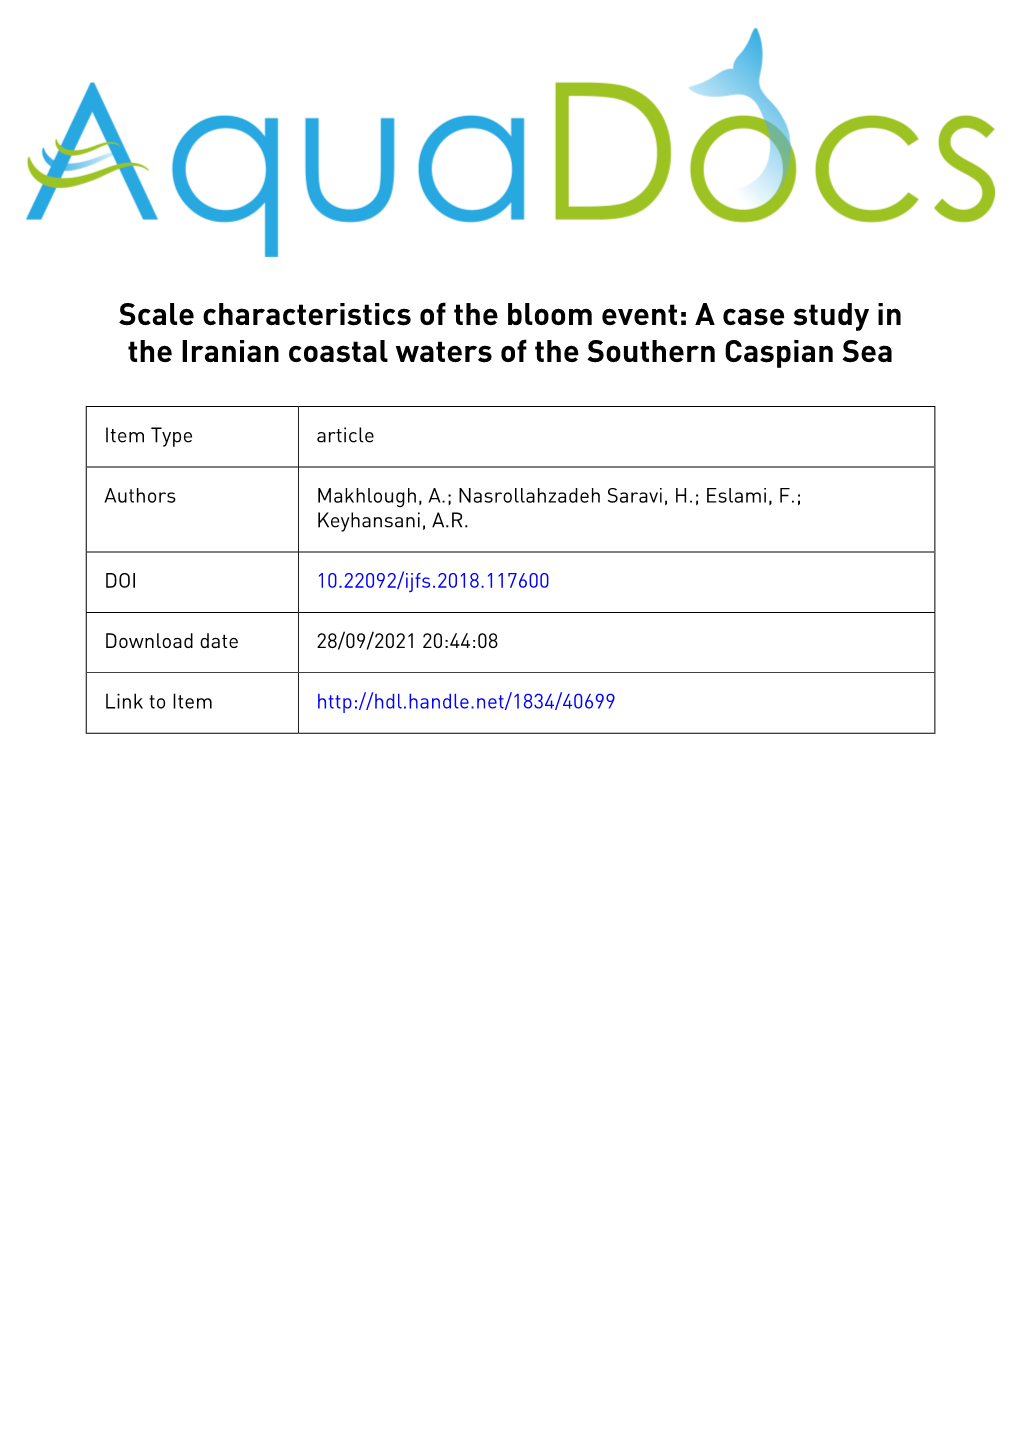 Scale Characteristics of the Bloom Event: a Case Study in the Iranian Coastal Waters of the Southern Caspian Sea